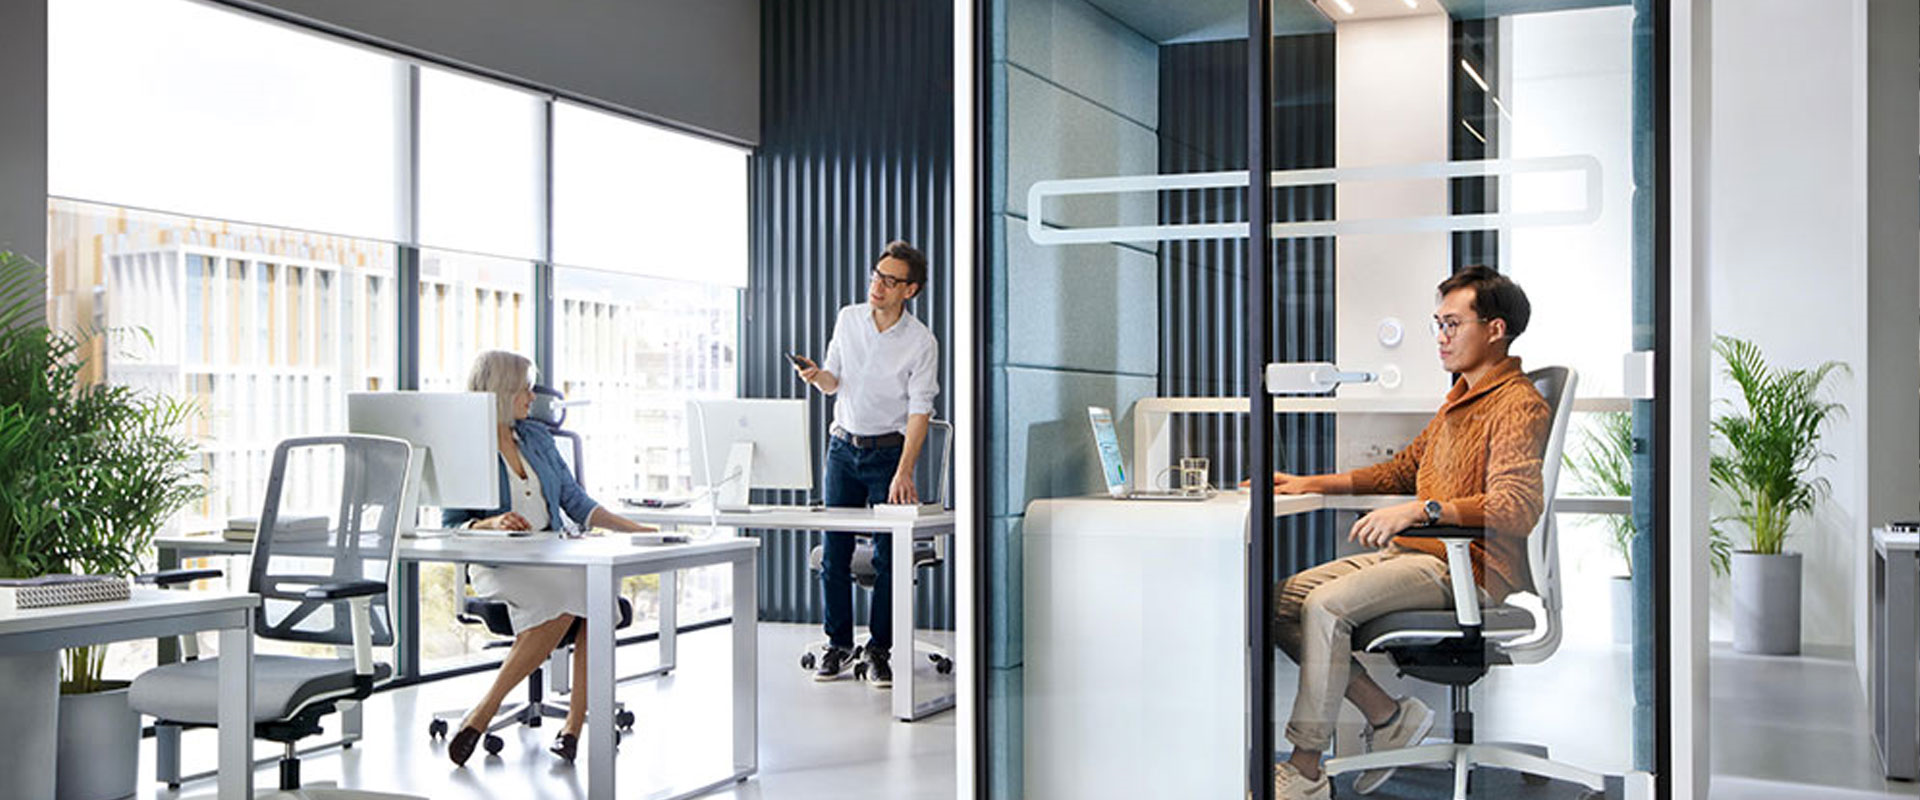 How to Use Office Pods for Brainstorming Sessions